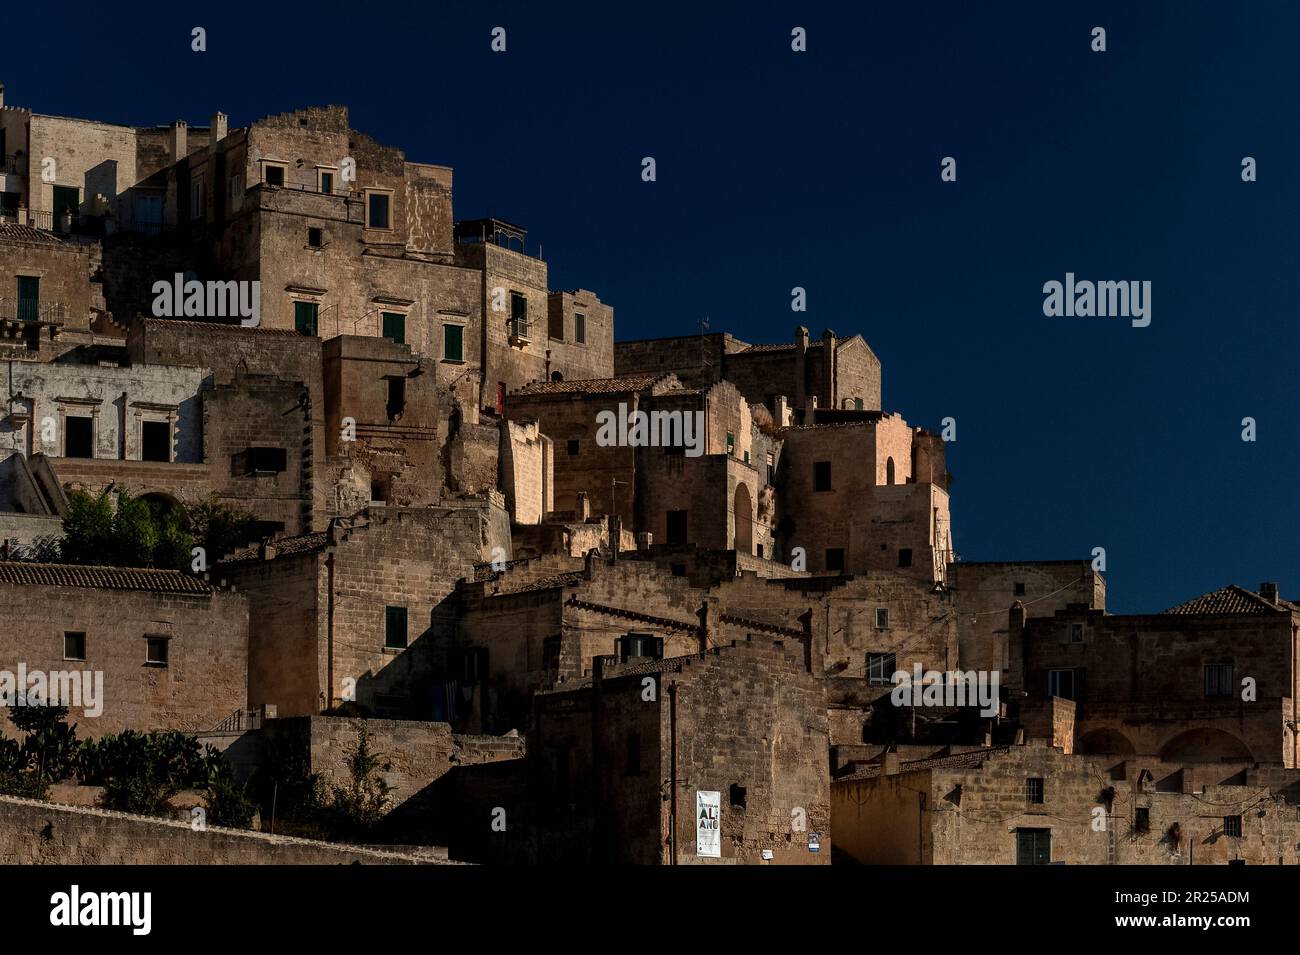 Matera, Basilicata, Italy, founded in about 250 BC, where troglodyte dwellings were cut in two ‘underground cities’, together known as the Sassi di Matera.  Today, the Sassi attract tourists and many cave dwellings have been enhanced, for example with the addition of new frontages, and are inhabited. Stock Photo